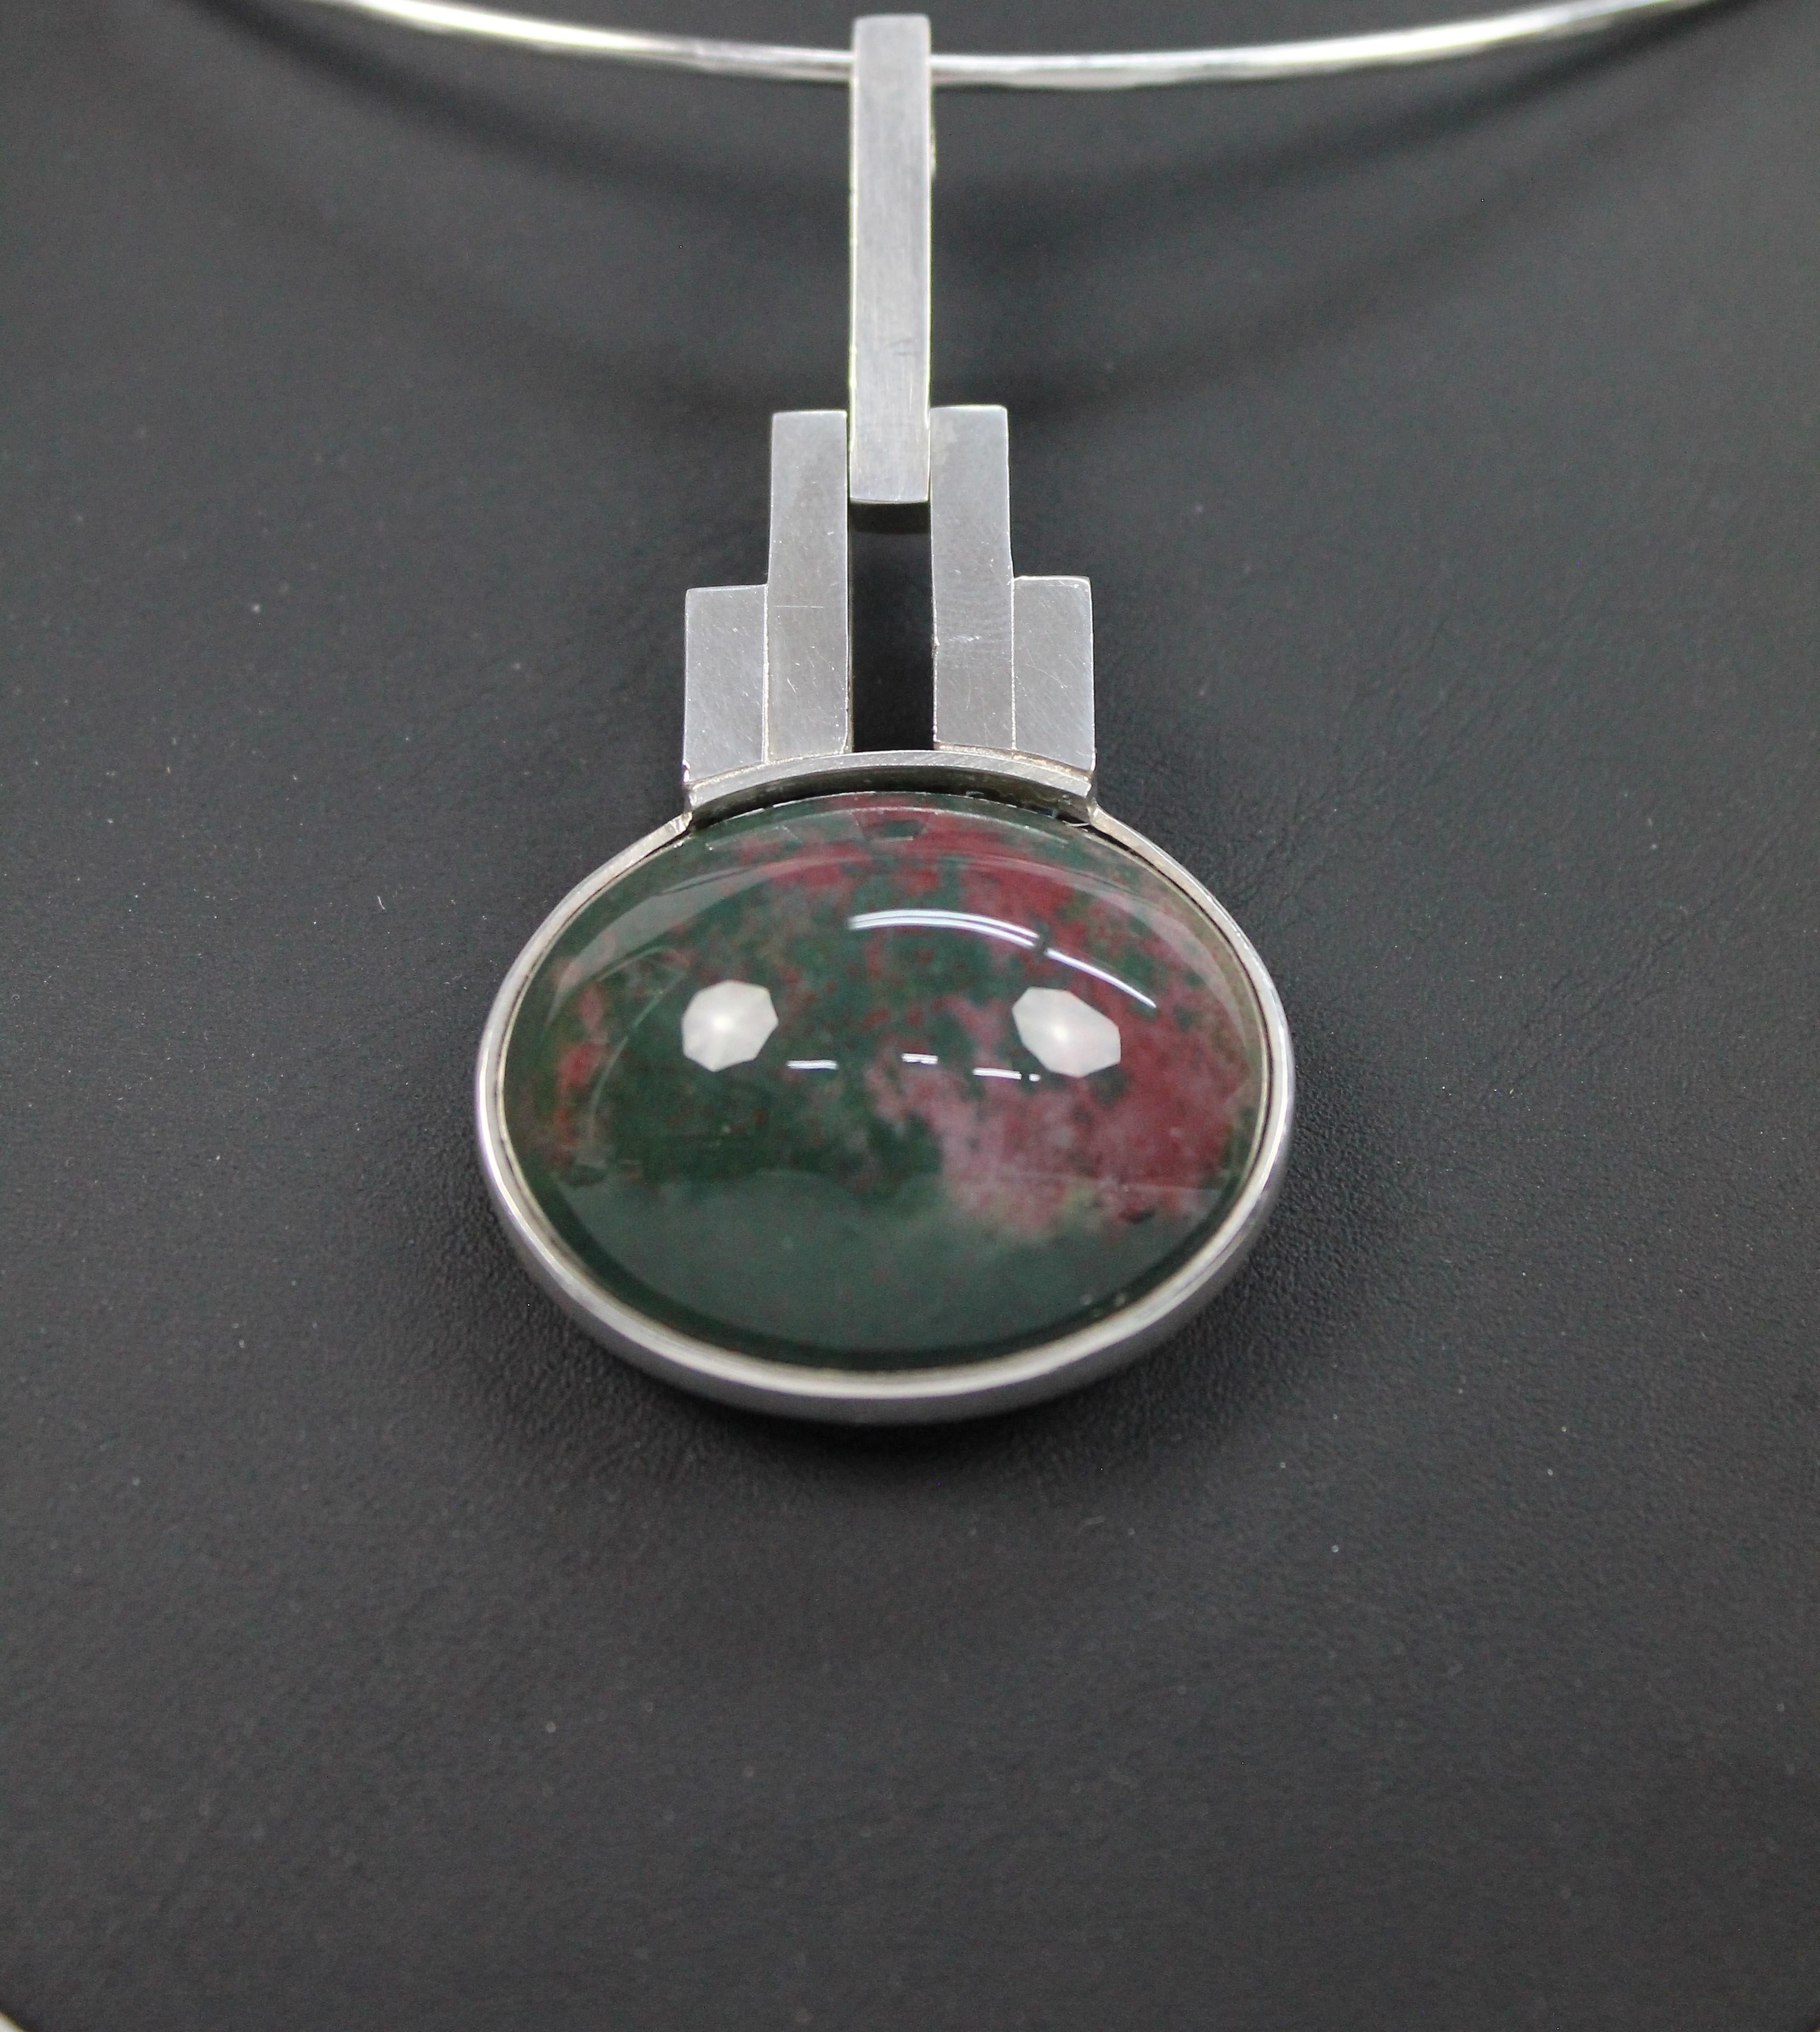 A modernist necklace by Elon Aronhill, Malmö Sweden 1967.
Both necklace and pendant are in sterling silver.
The pendant is set with a large cabochon cut bloodstone or Heliotrope.

Very nice vintage condition. No issues.

The diameter of the ring is